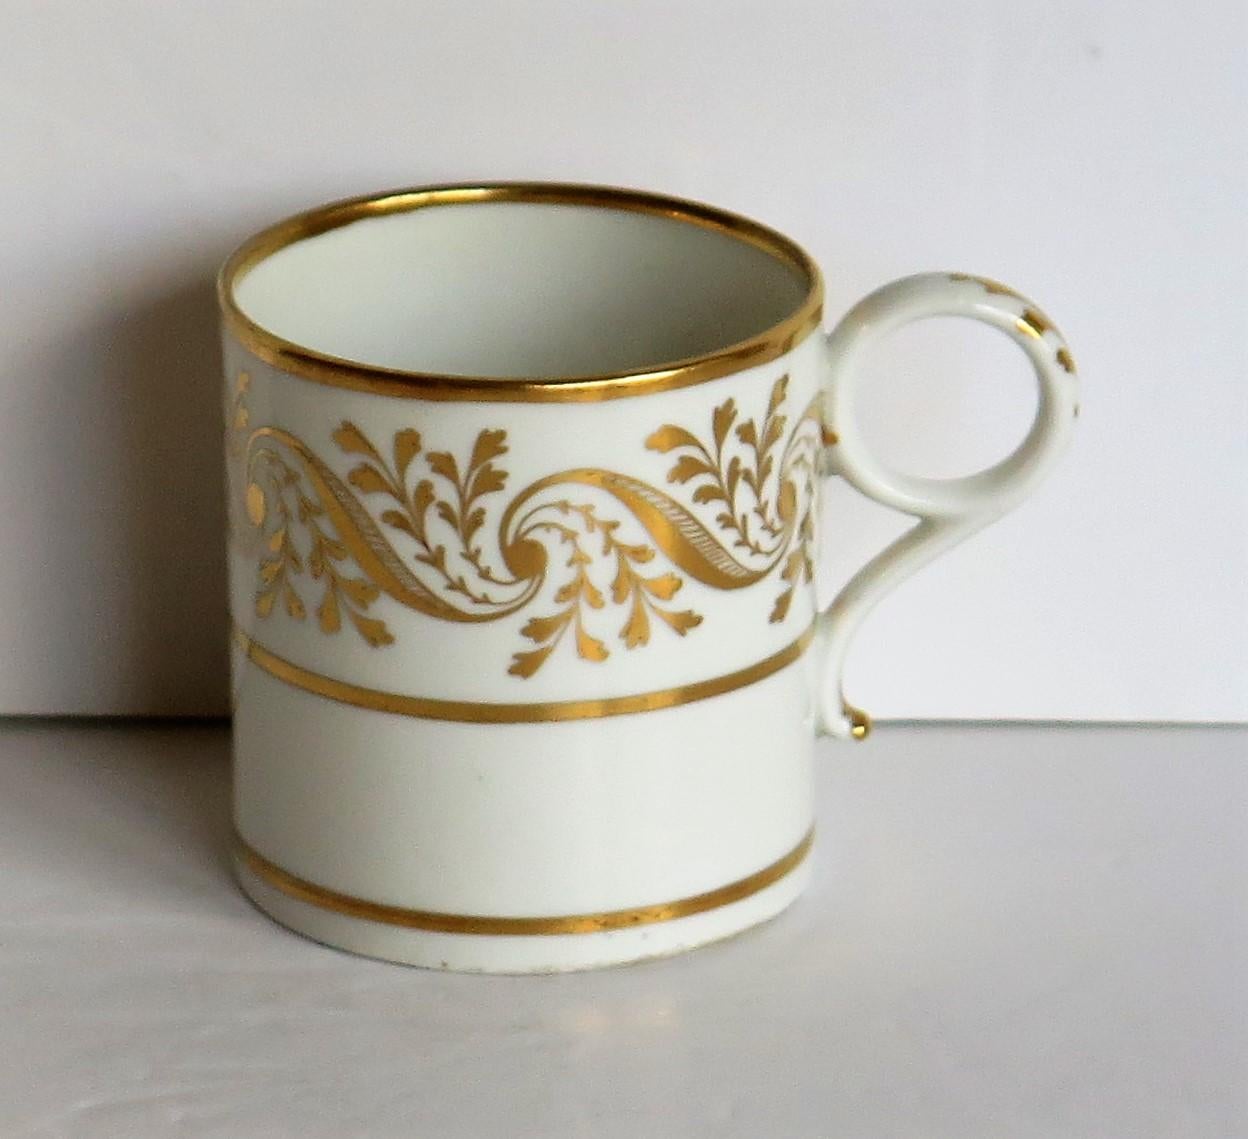 This is a very good quality coffee can in a hand gilded pattern made by Worcester during the Barr, Flight & Barr period (BFB) of George 111rd years, circa 1807-1813.

The coffee can is well potted and nominally parallel, with a ring handle. It has